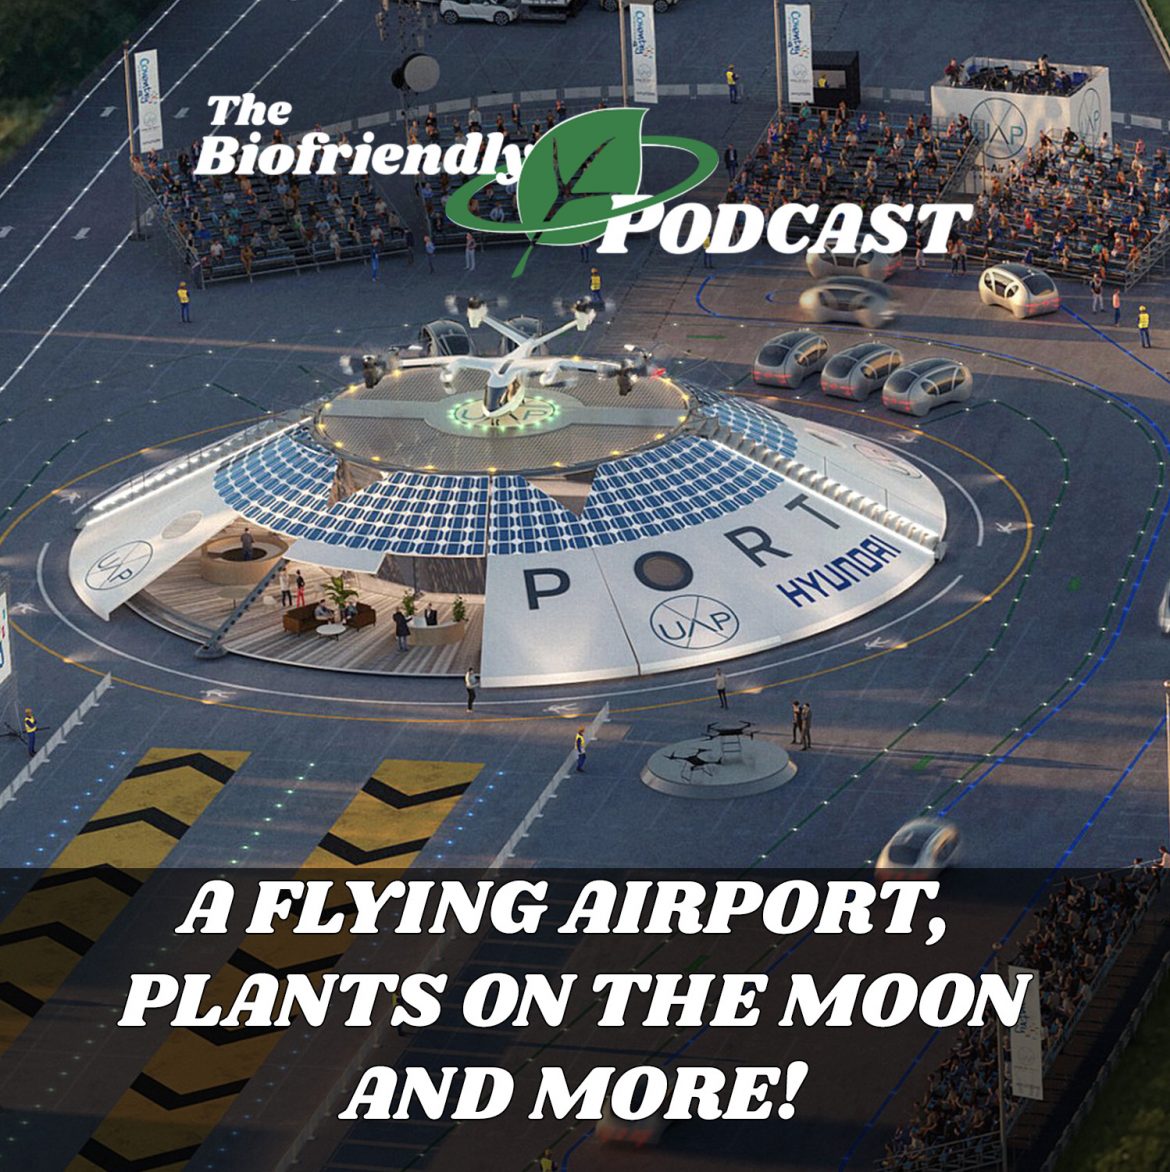 A Flying Airport, Plants on the Moon and More!